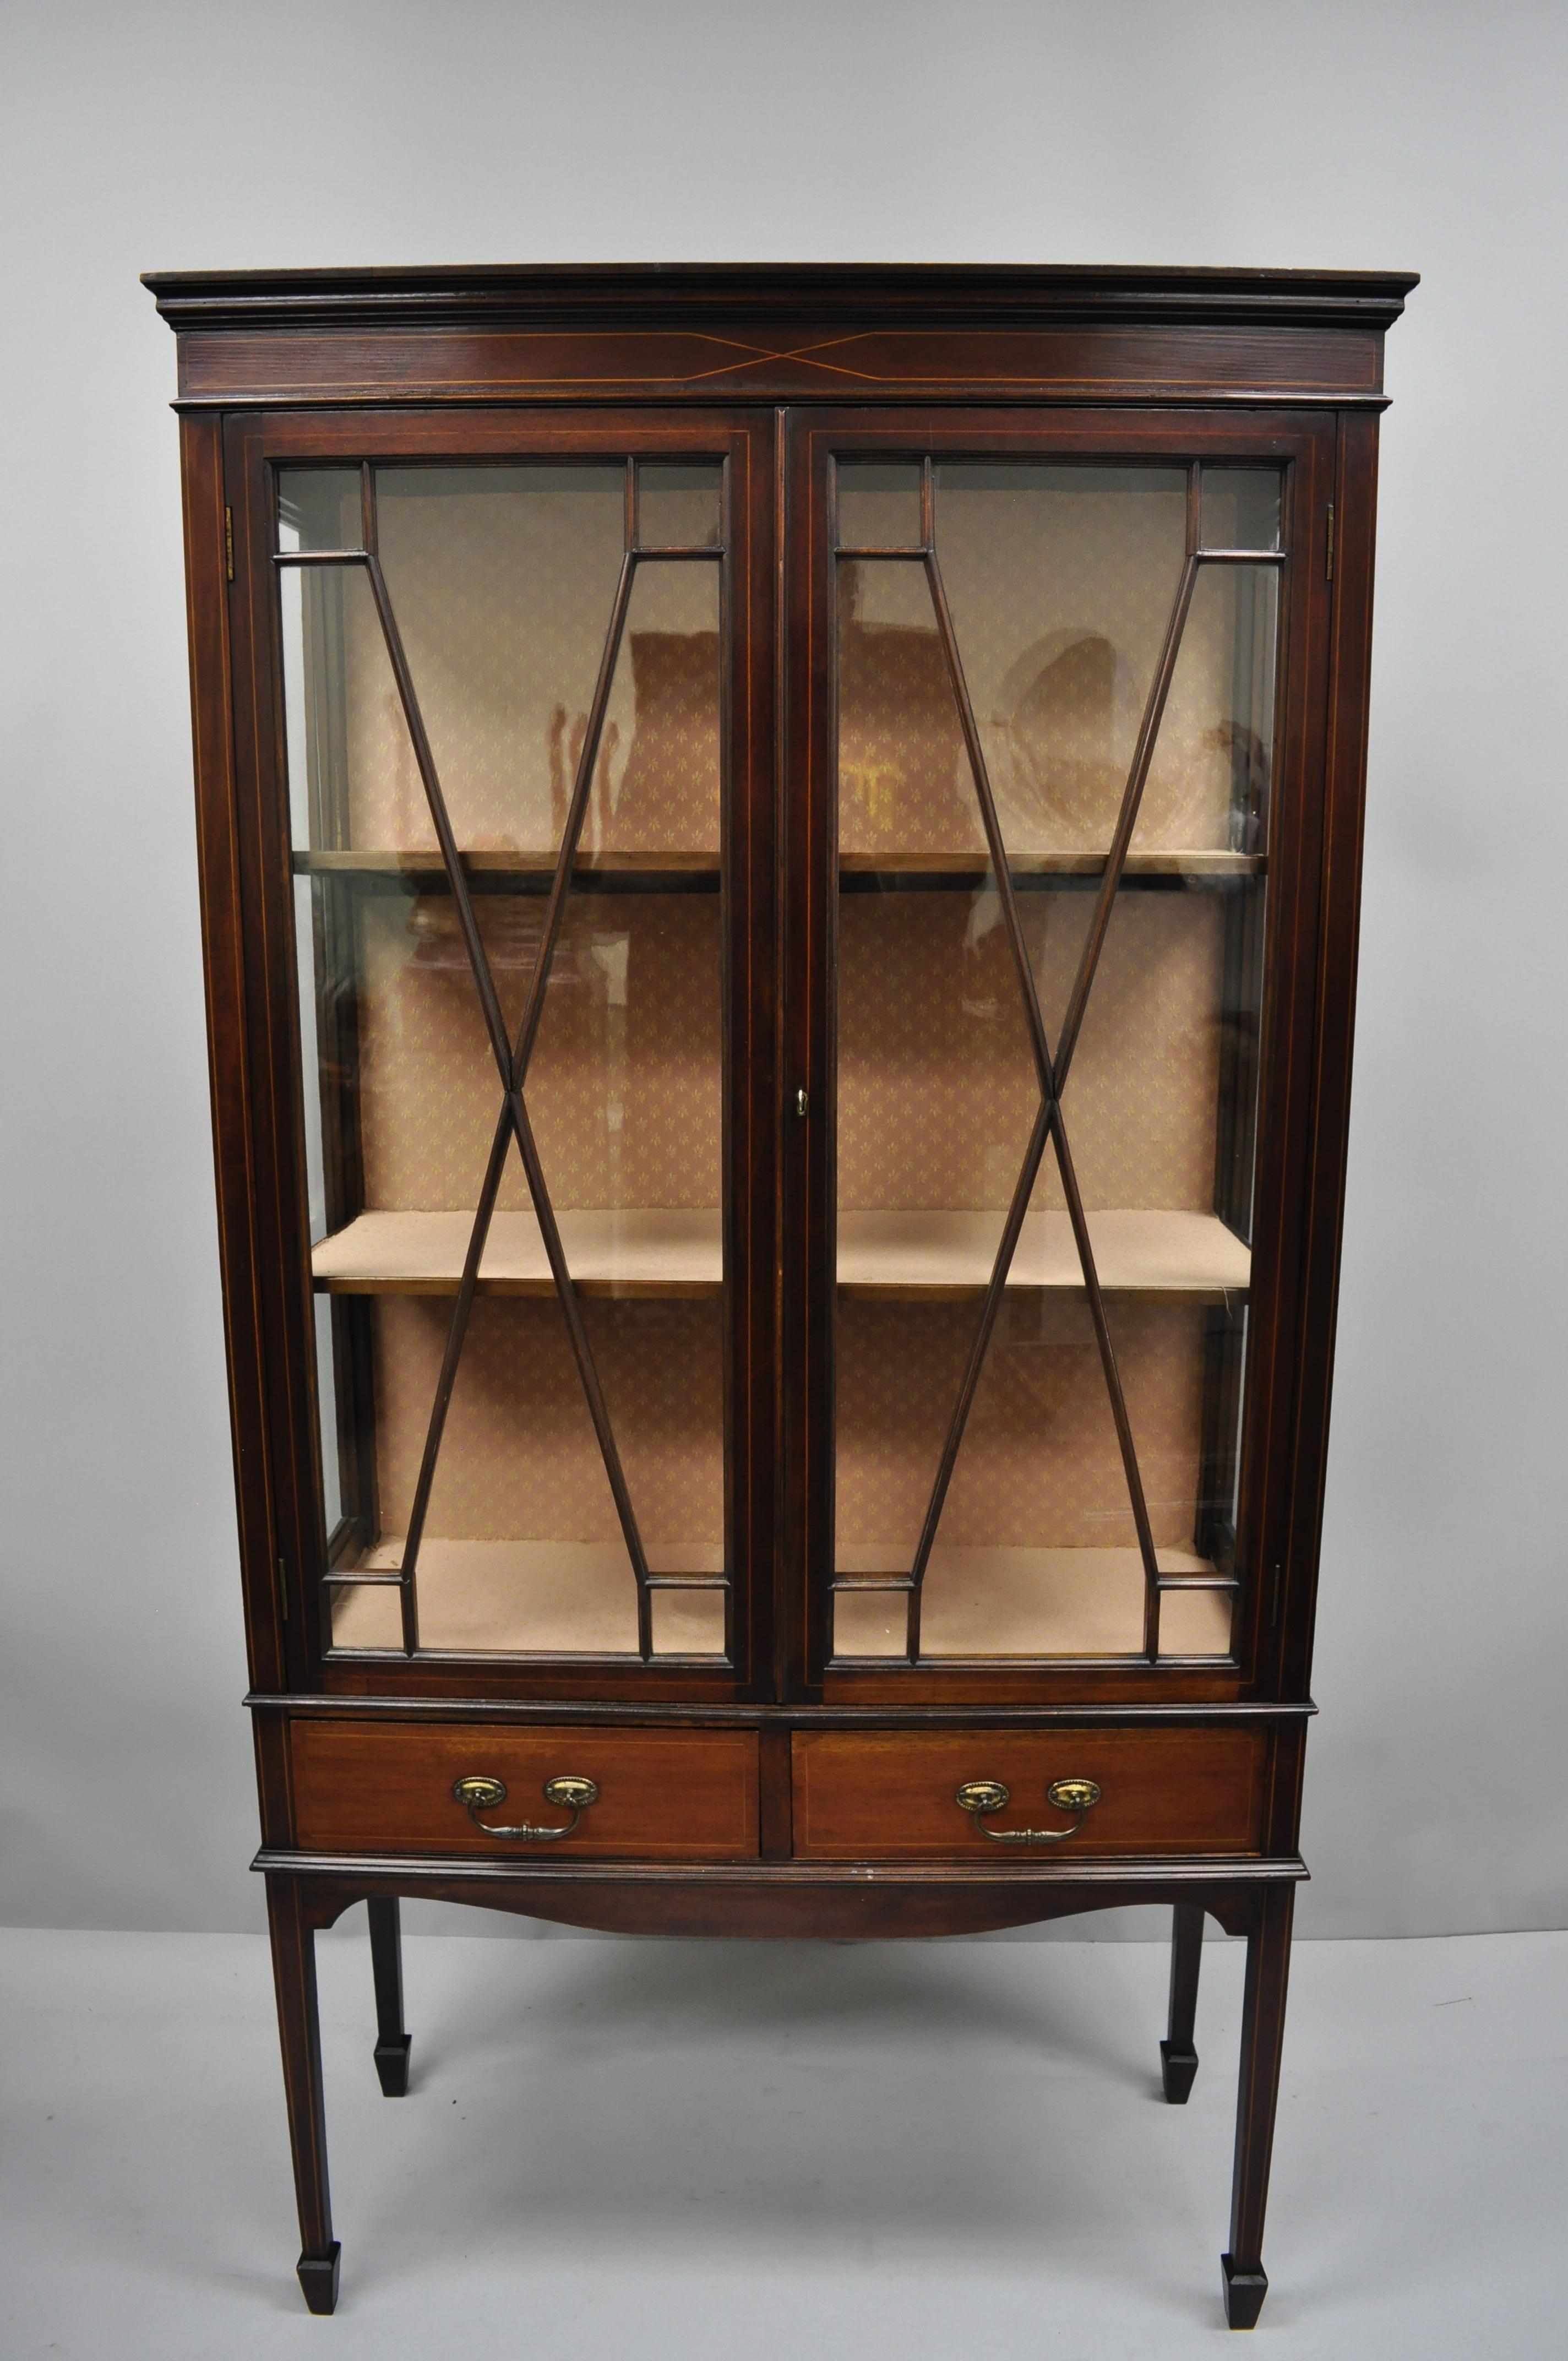 Antique mahogany English Edwardian inlaid two-door Curio China cabinet. Item features individual panes of glass, glass sides, fabric lined lighted interior, two glass swing doors, two hand dovetailed drawers, working lock and key, tall tapered legs,